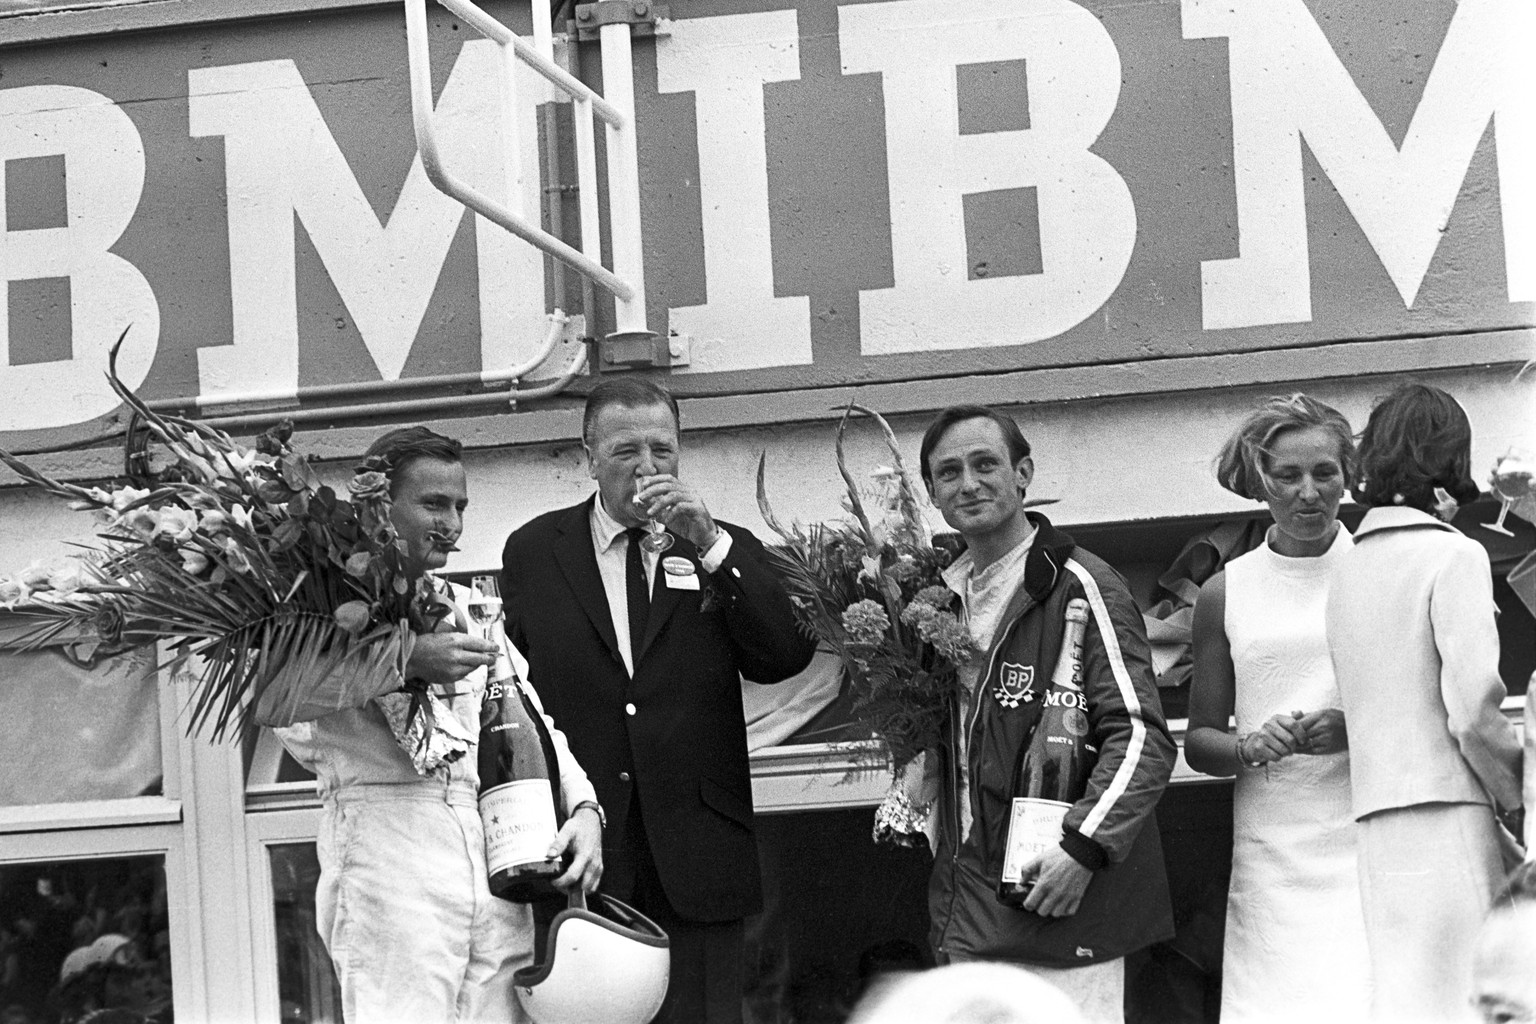 Bruce McLaren, Henry Ford II, Chris Amon, 24 Hours of Le Mans, Le Mans, 19 June 1966. (Photo by Bernard Cahier/Getty Images)